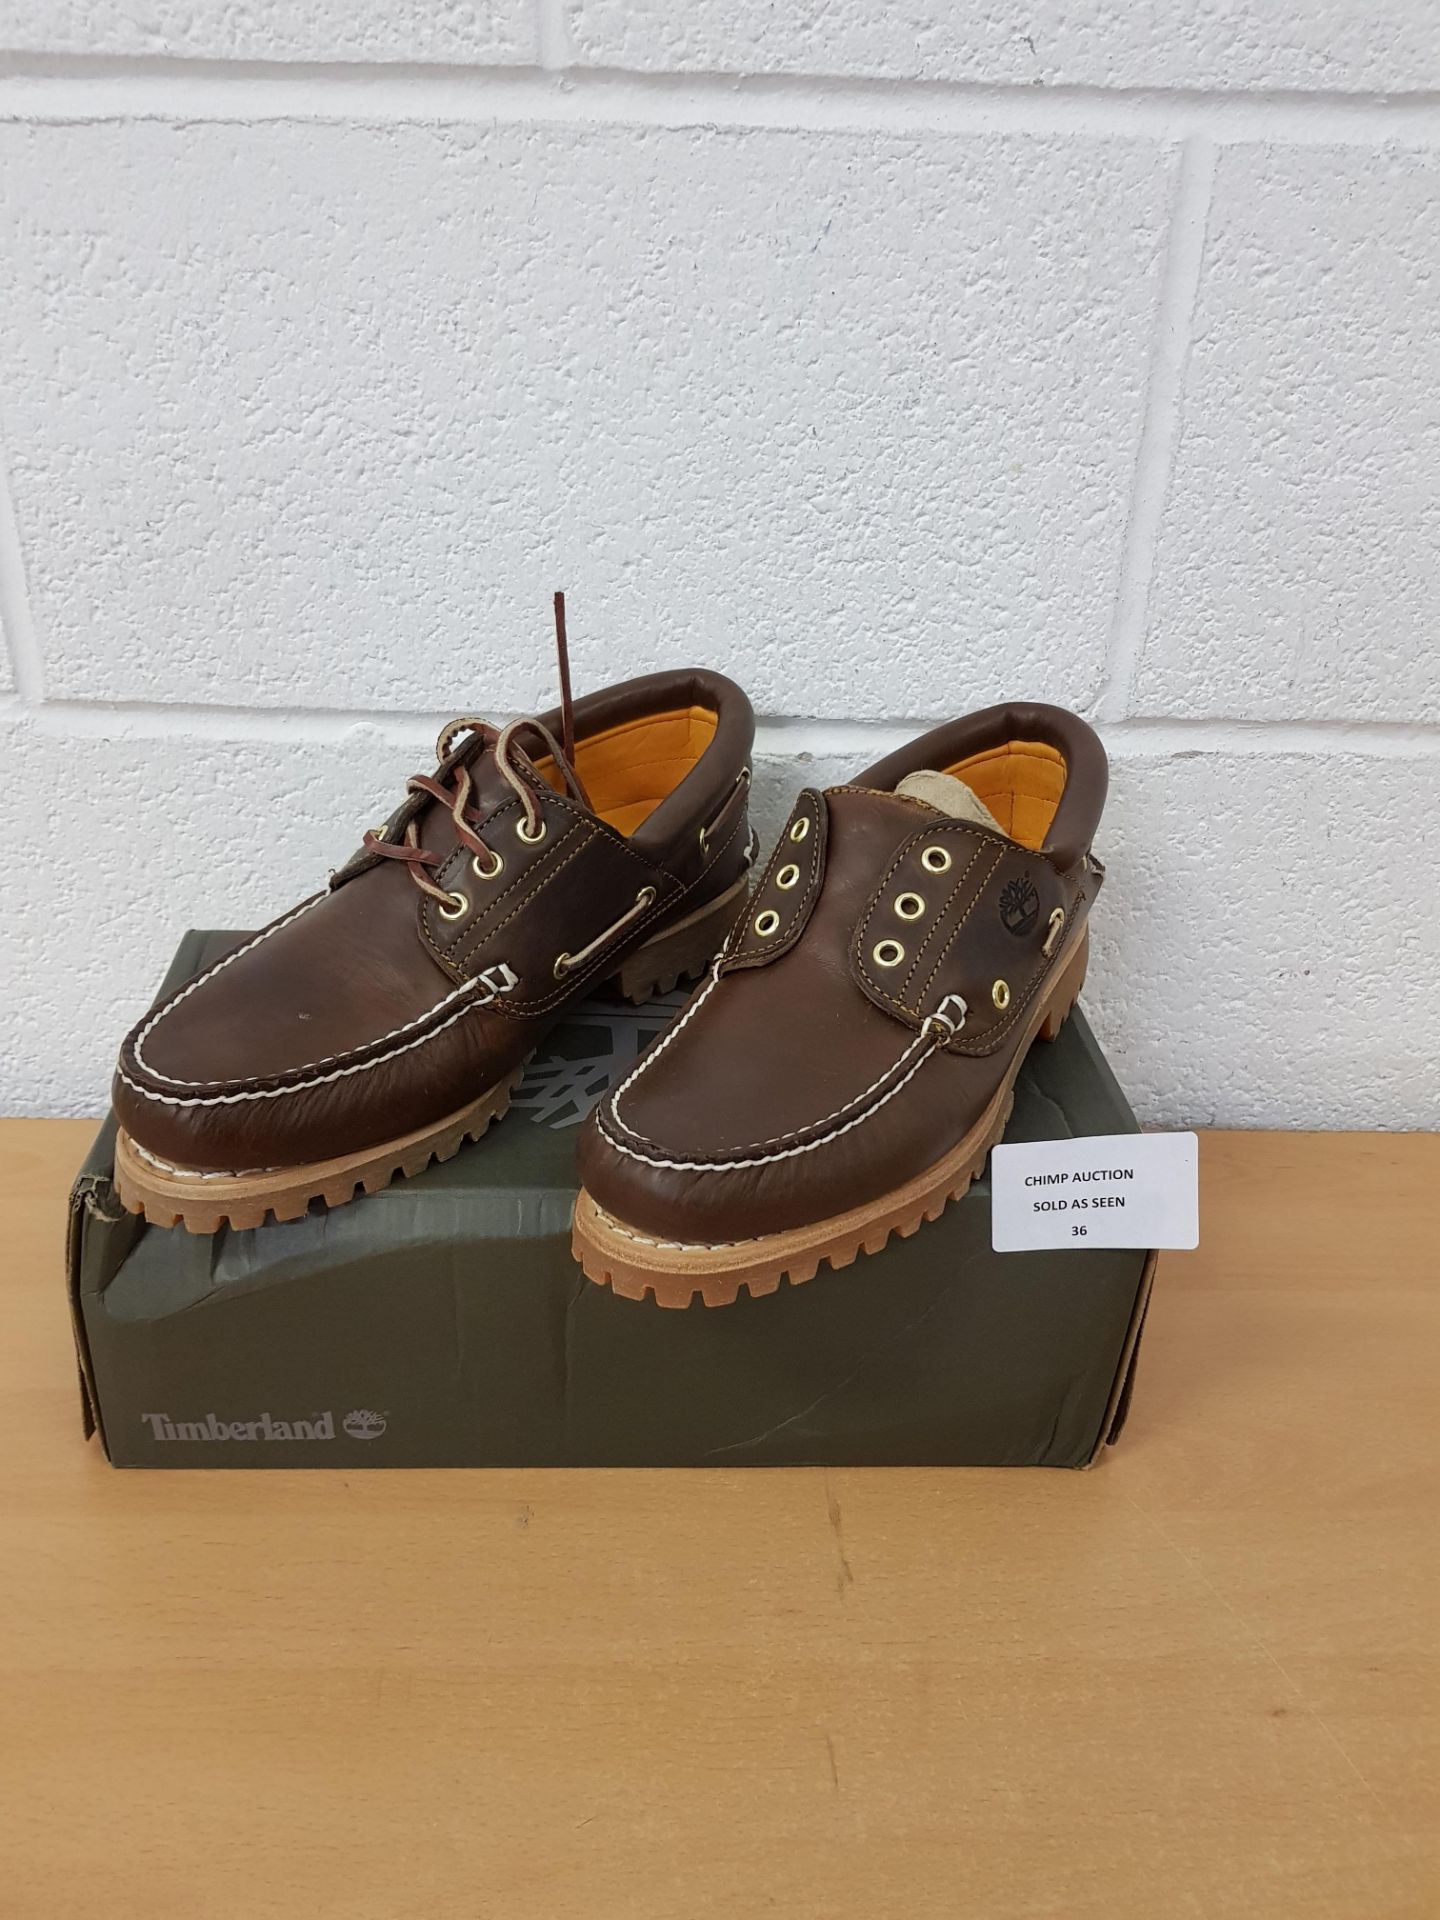 Timberland Authentic 3 Eye Lug MD men's shoes UK 7.5 RRP £139.99